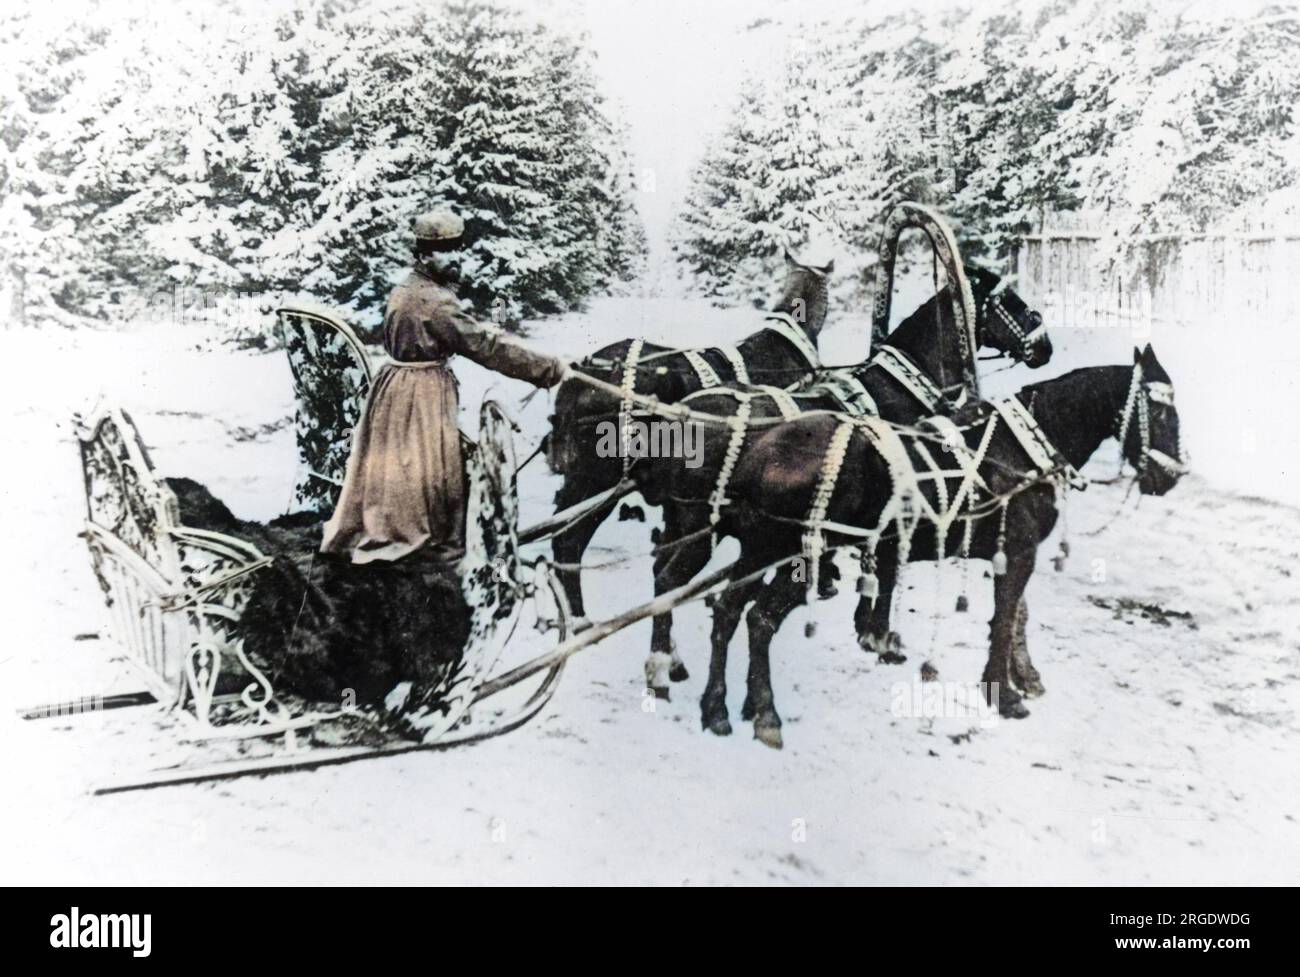 A late 19th century decorative Russian Horse Drawn sledge called a Trioka. Troika is the Russian word for 'triplet' or 'trio' this being reference to the fact that troikas have three harnesses as they are pulled by three horses. Stock Photo